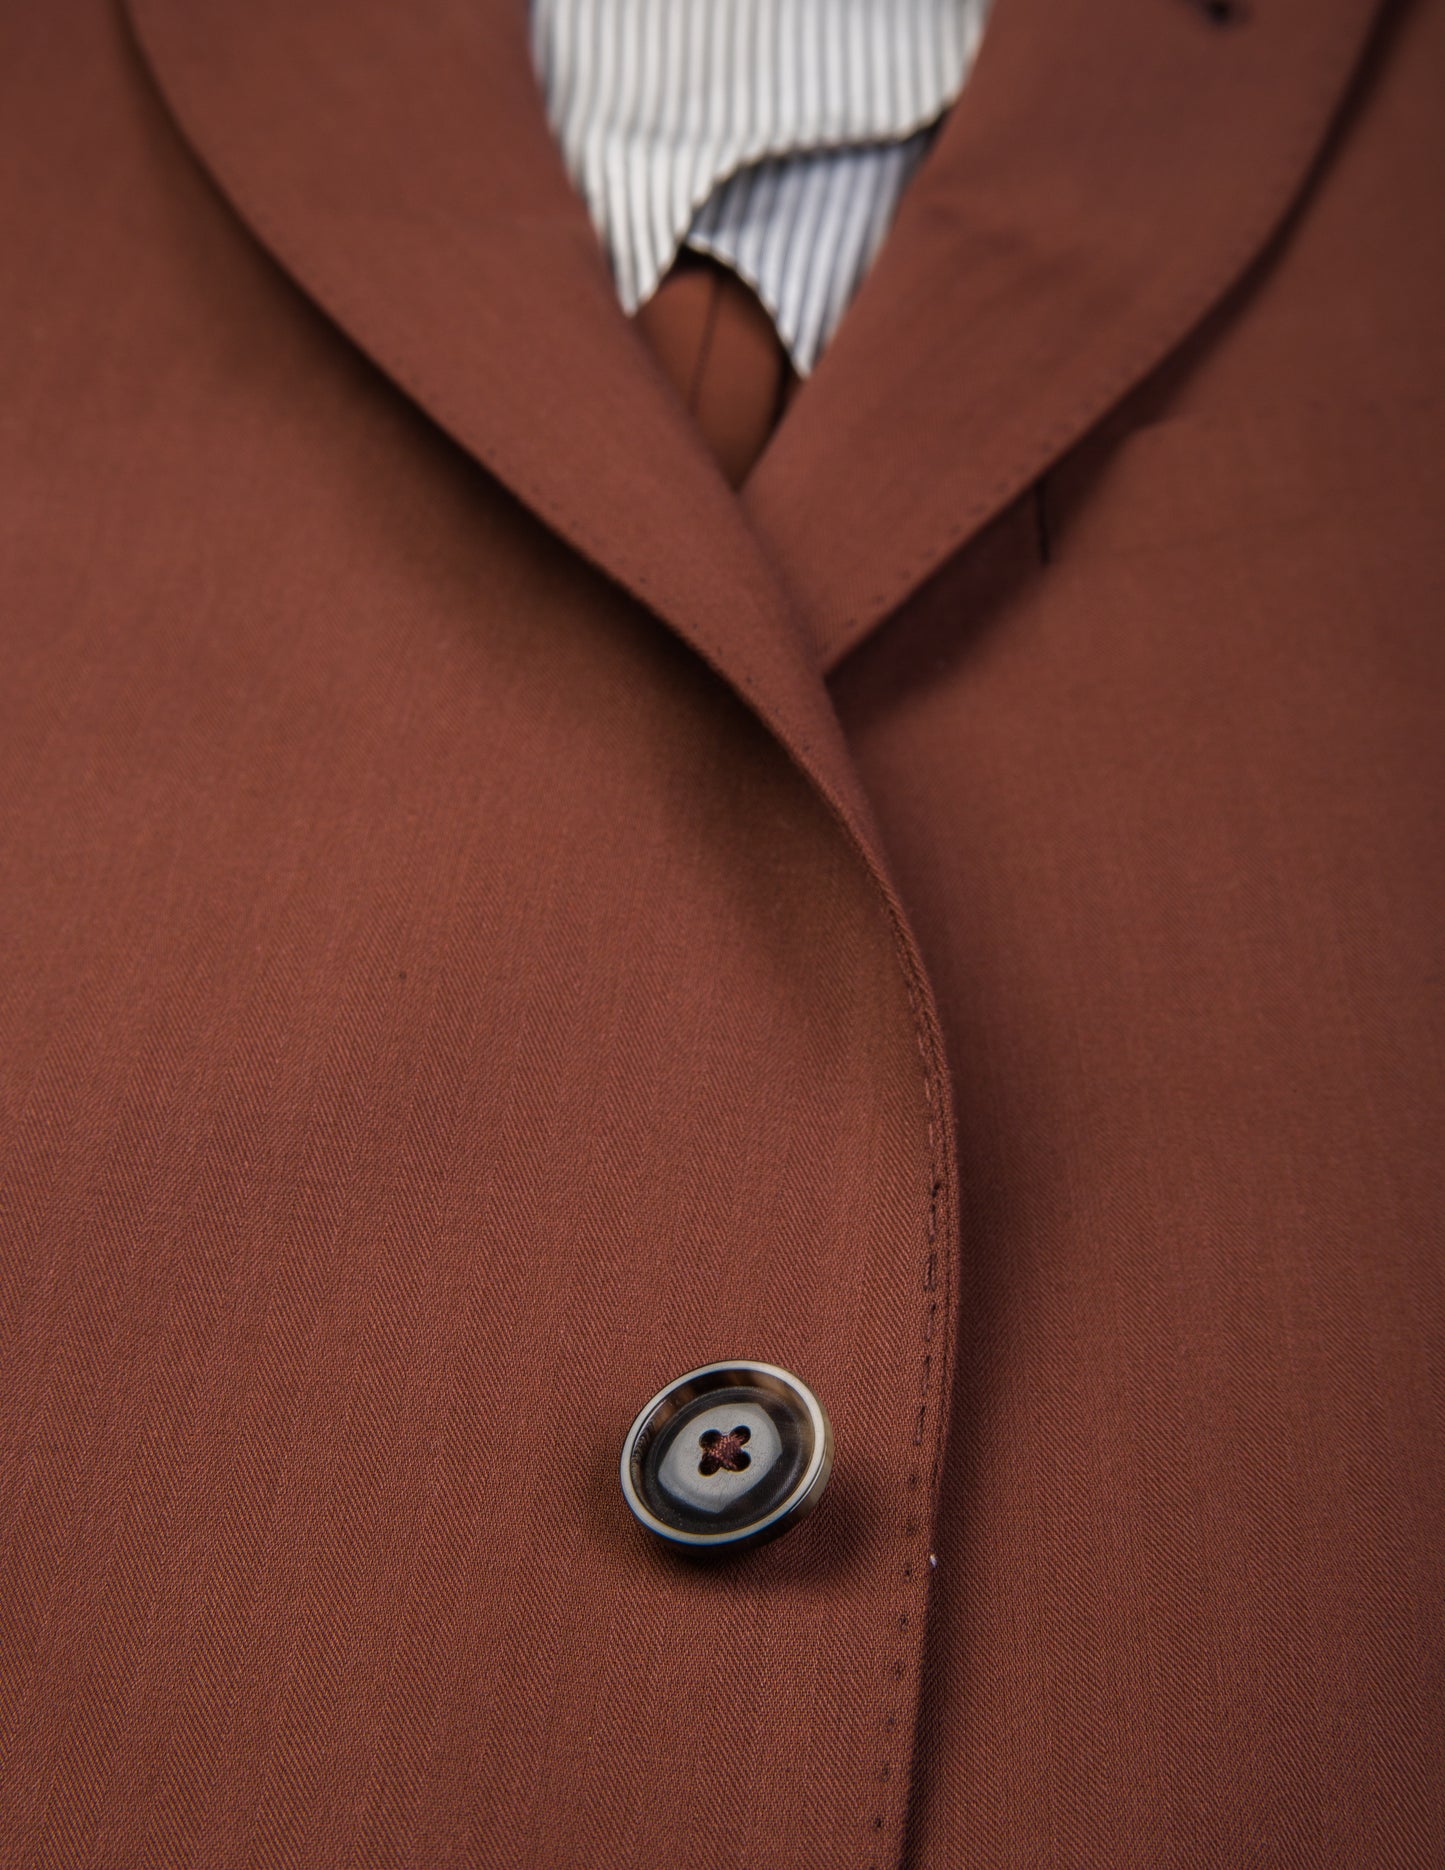 Detail shot of Brooklyn Tailors BKT50 Tailored Jacket in Herringbone Wool/Cotton - Brick showing button and fabric texture